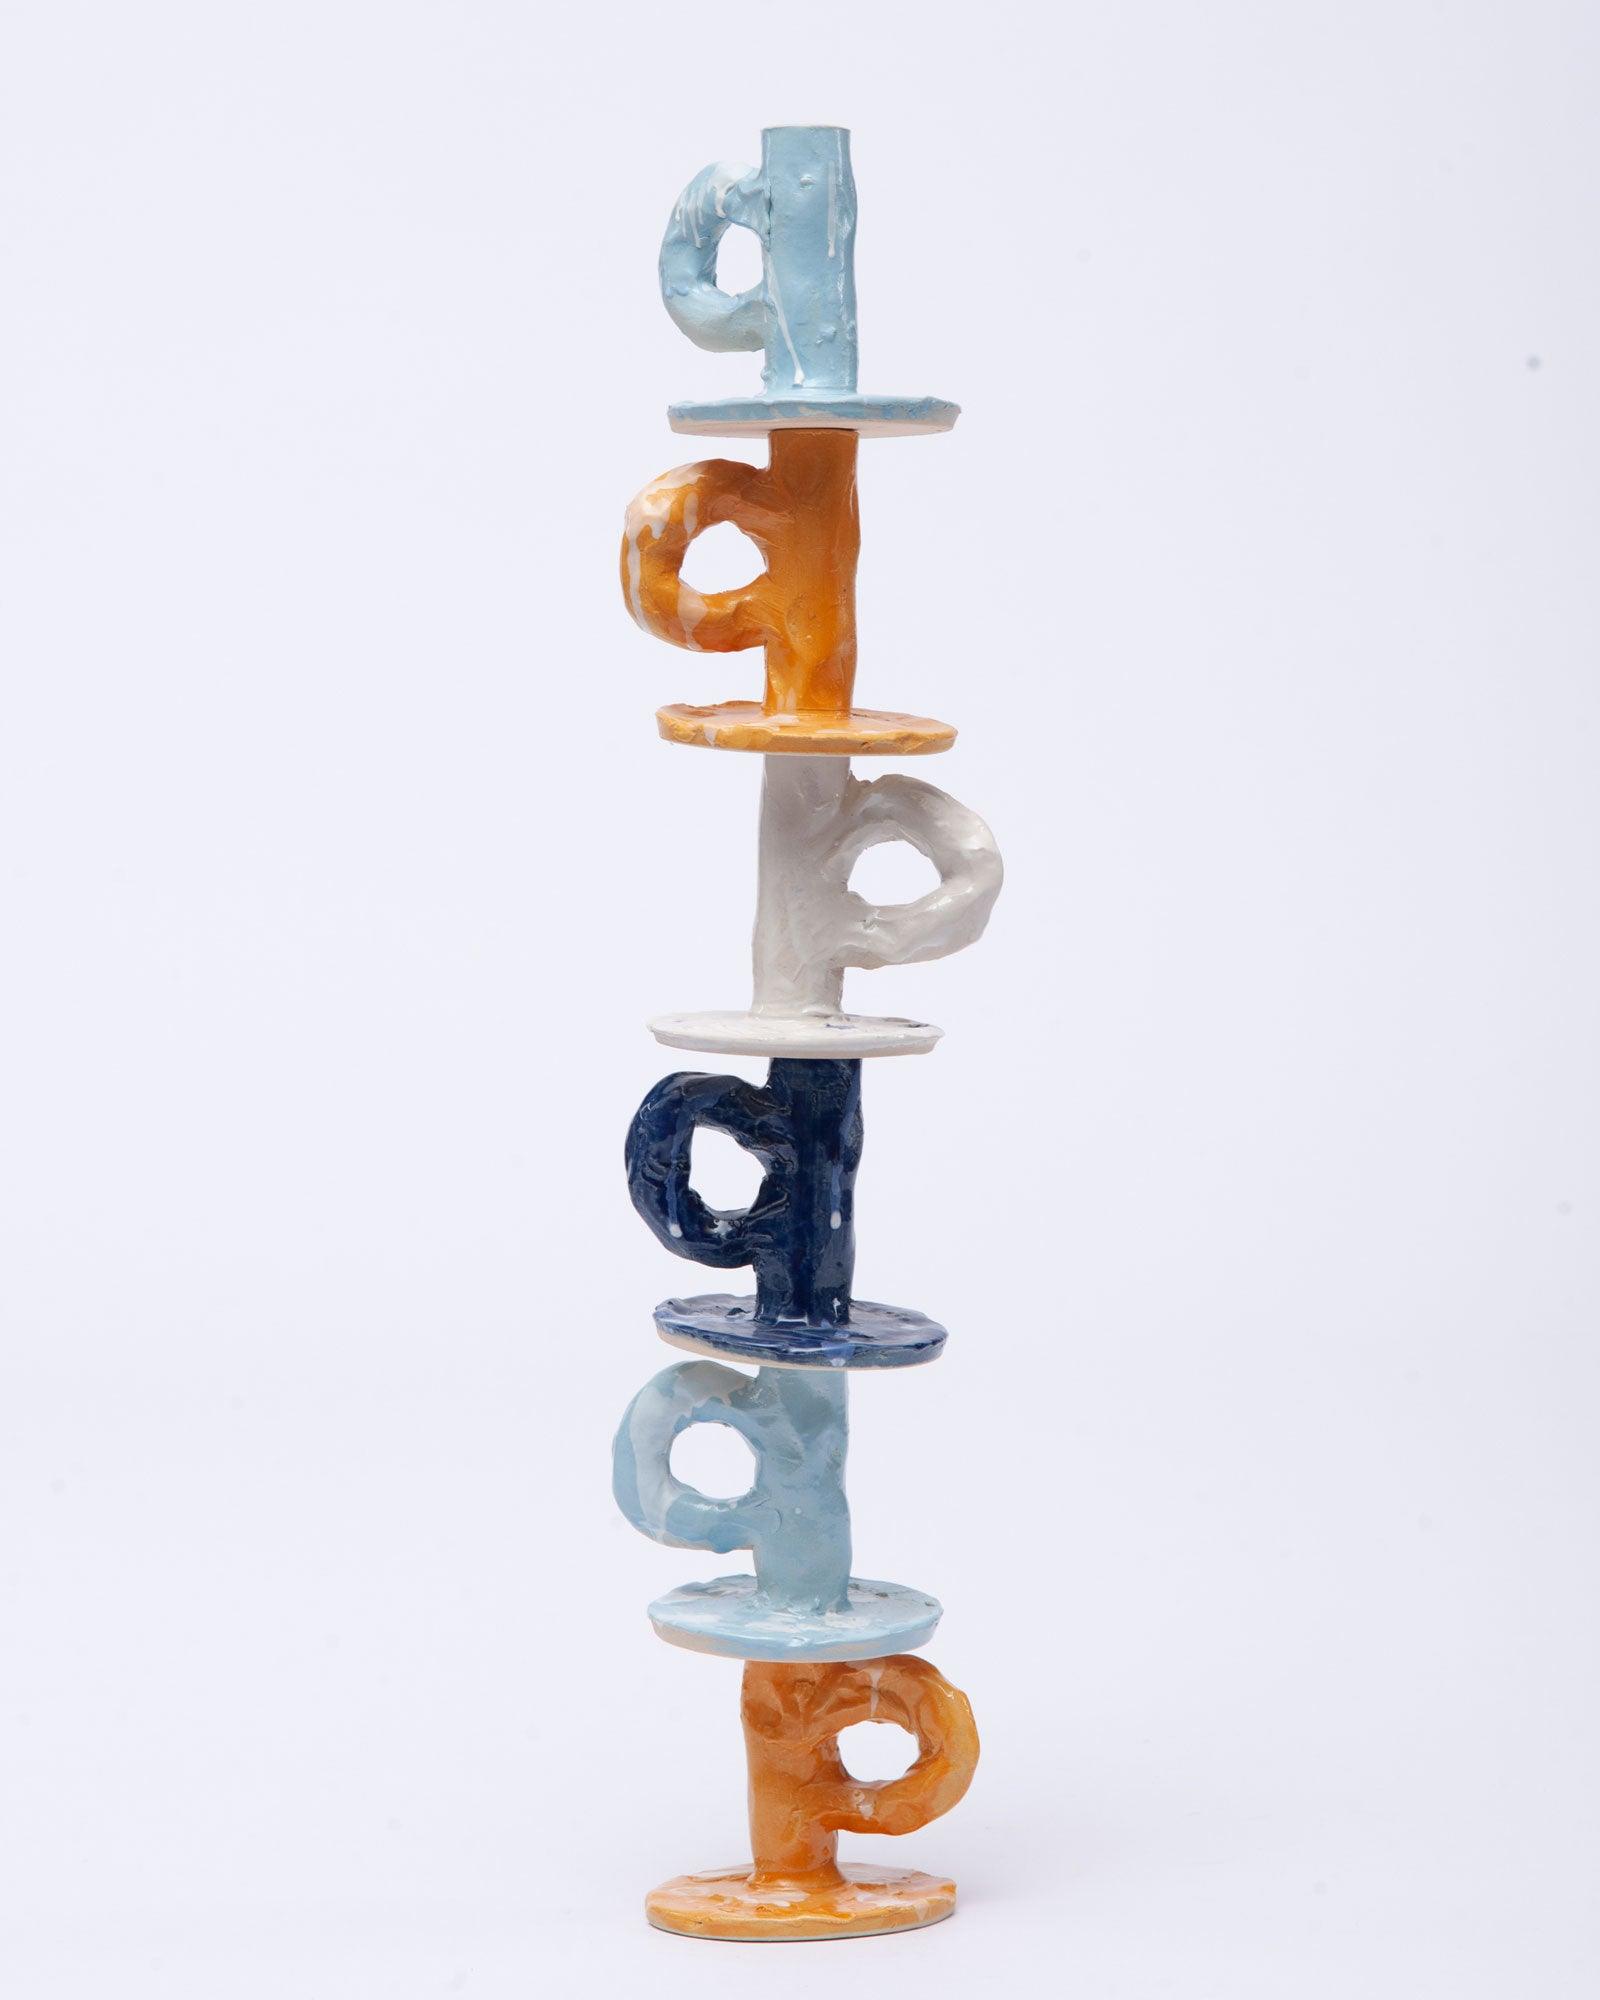 Handmade six candlesticks of different colors one on top of the other on white background